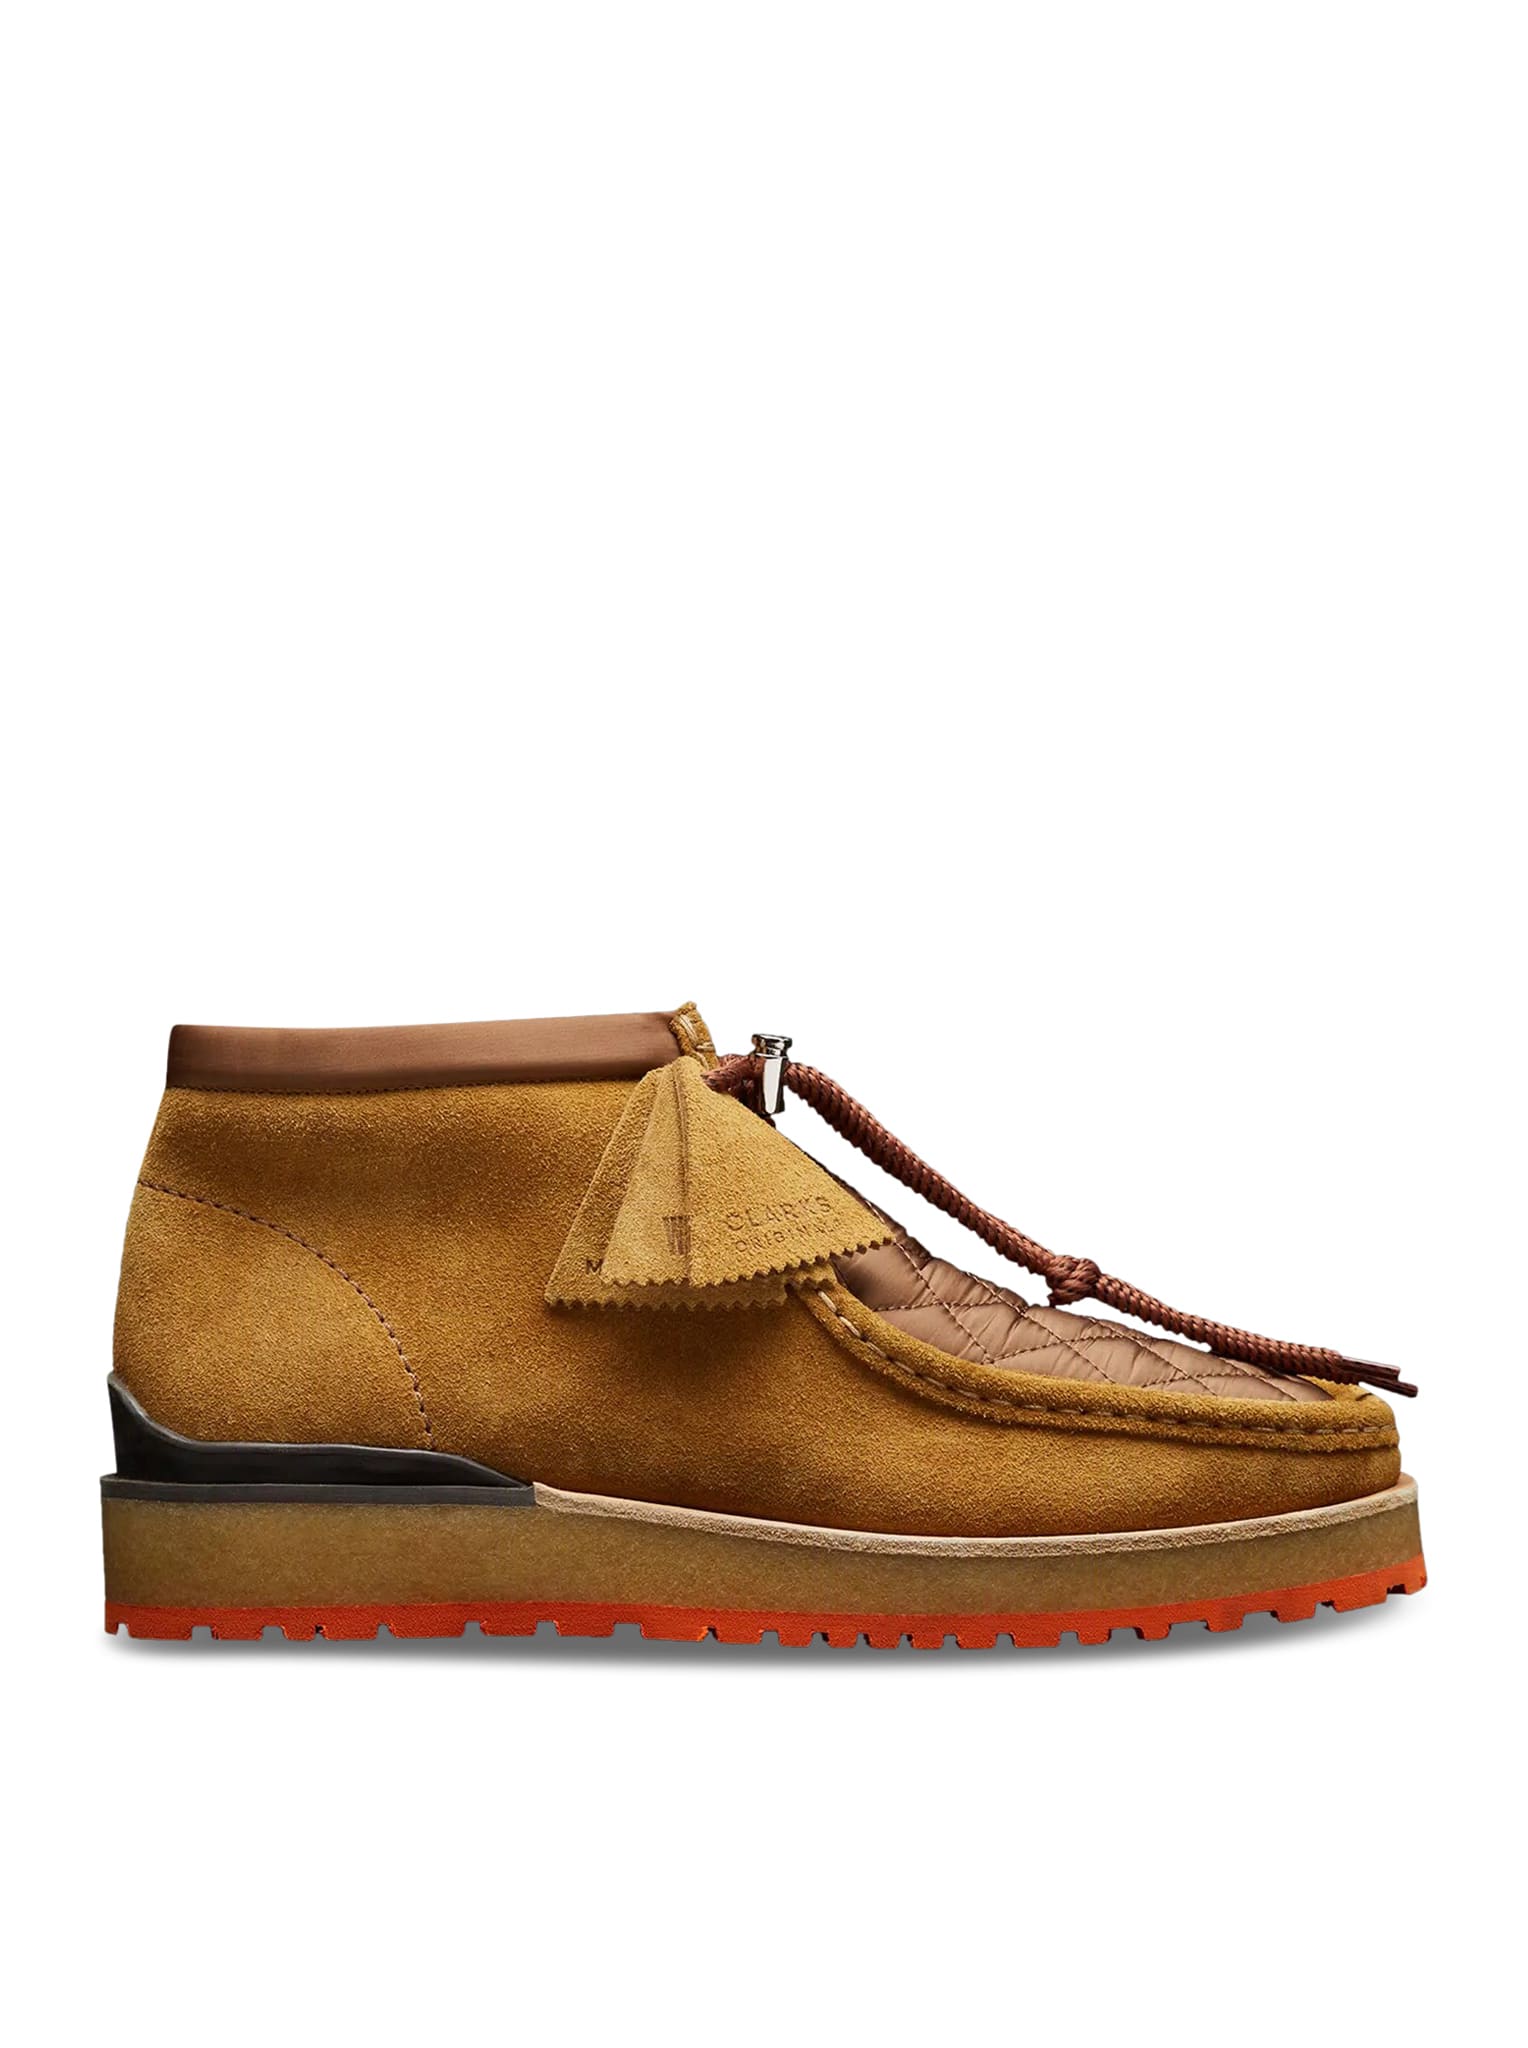 Moncler Genius Wallabee Loafers Shoes